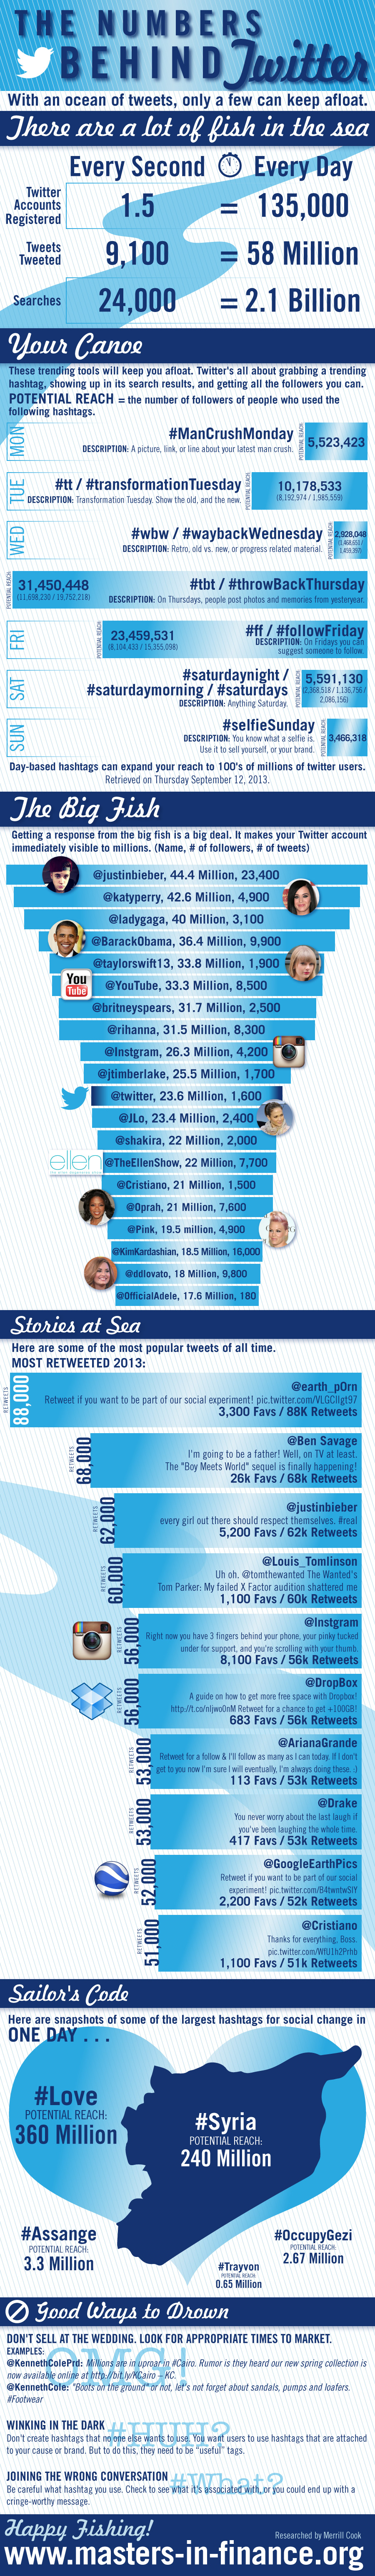 Twitter Growth Infographic